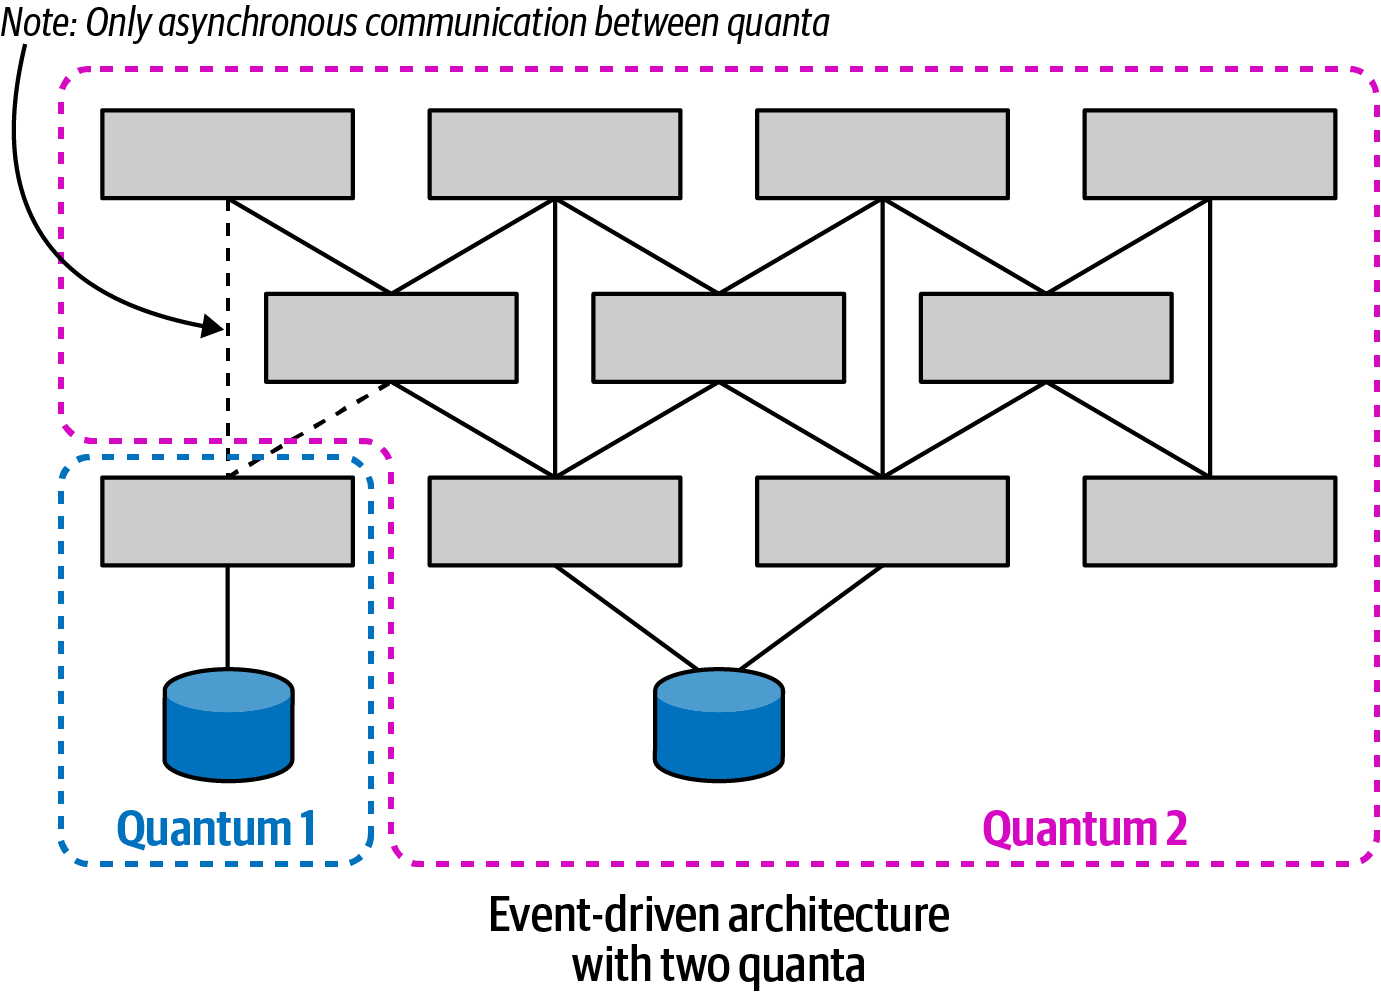 An event-driven architecture with two quanta